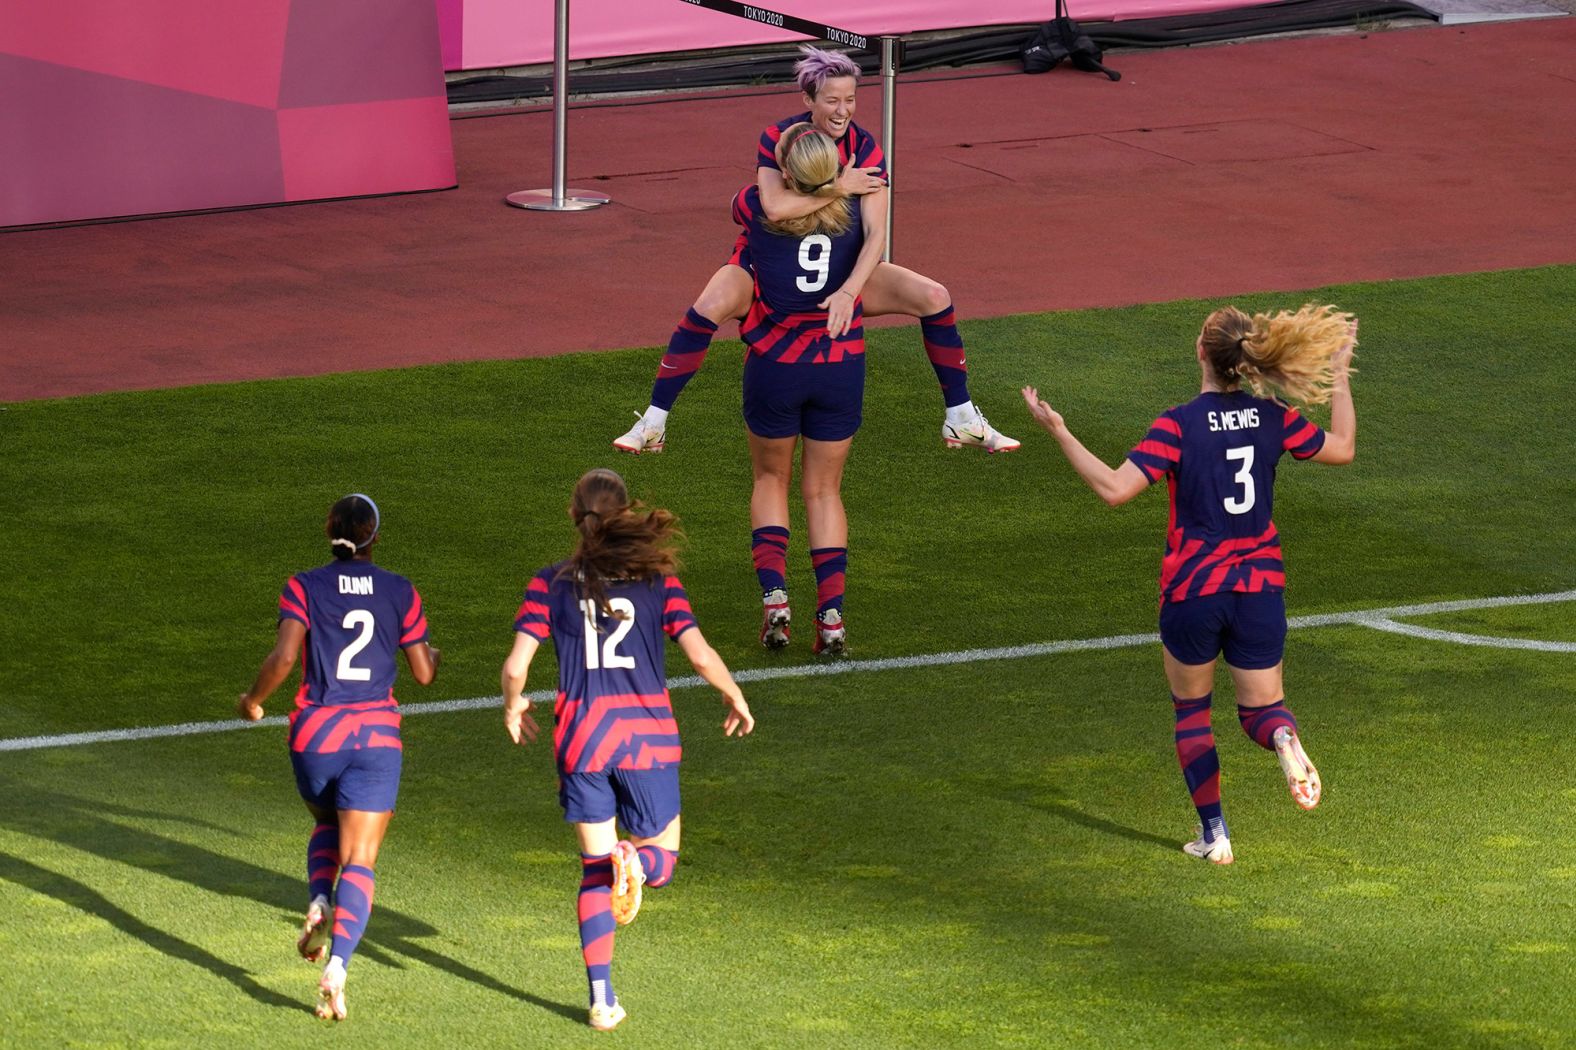 The United States' Megan Rapinoe celebrates with her teammates after scoring the opening goal of the bronze-medal match against Australia on August 5. It was an Olimpico goal, which is a goal straight from a corner kick, and she later added another score as <a href="index.php?page=&url=https%3A%2F%2Fwww.cnn.com%2Fworld%2Flive-news%2Ftokyo-2020-olympics-08-05-21-spt%2Fh_3d38ca534ac779dbd51a3419ada50589" target="_blank">the United States won 4-3.</a>